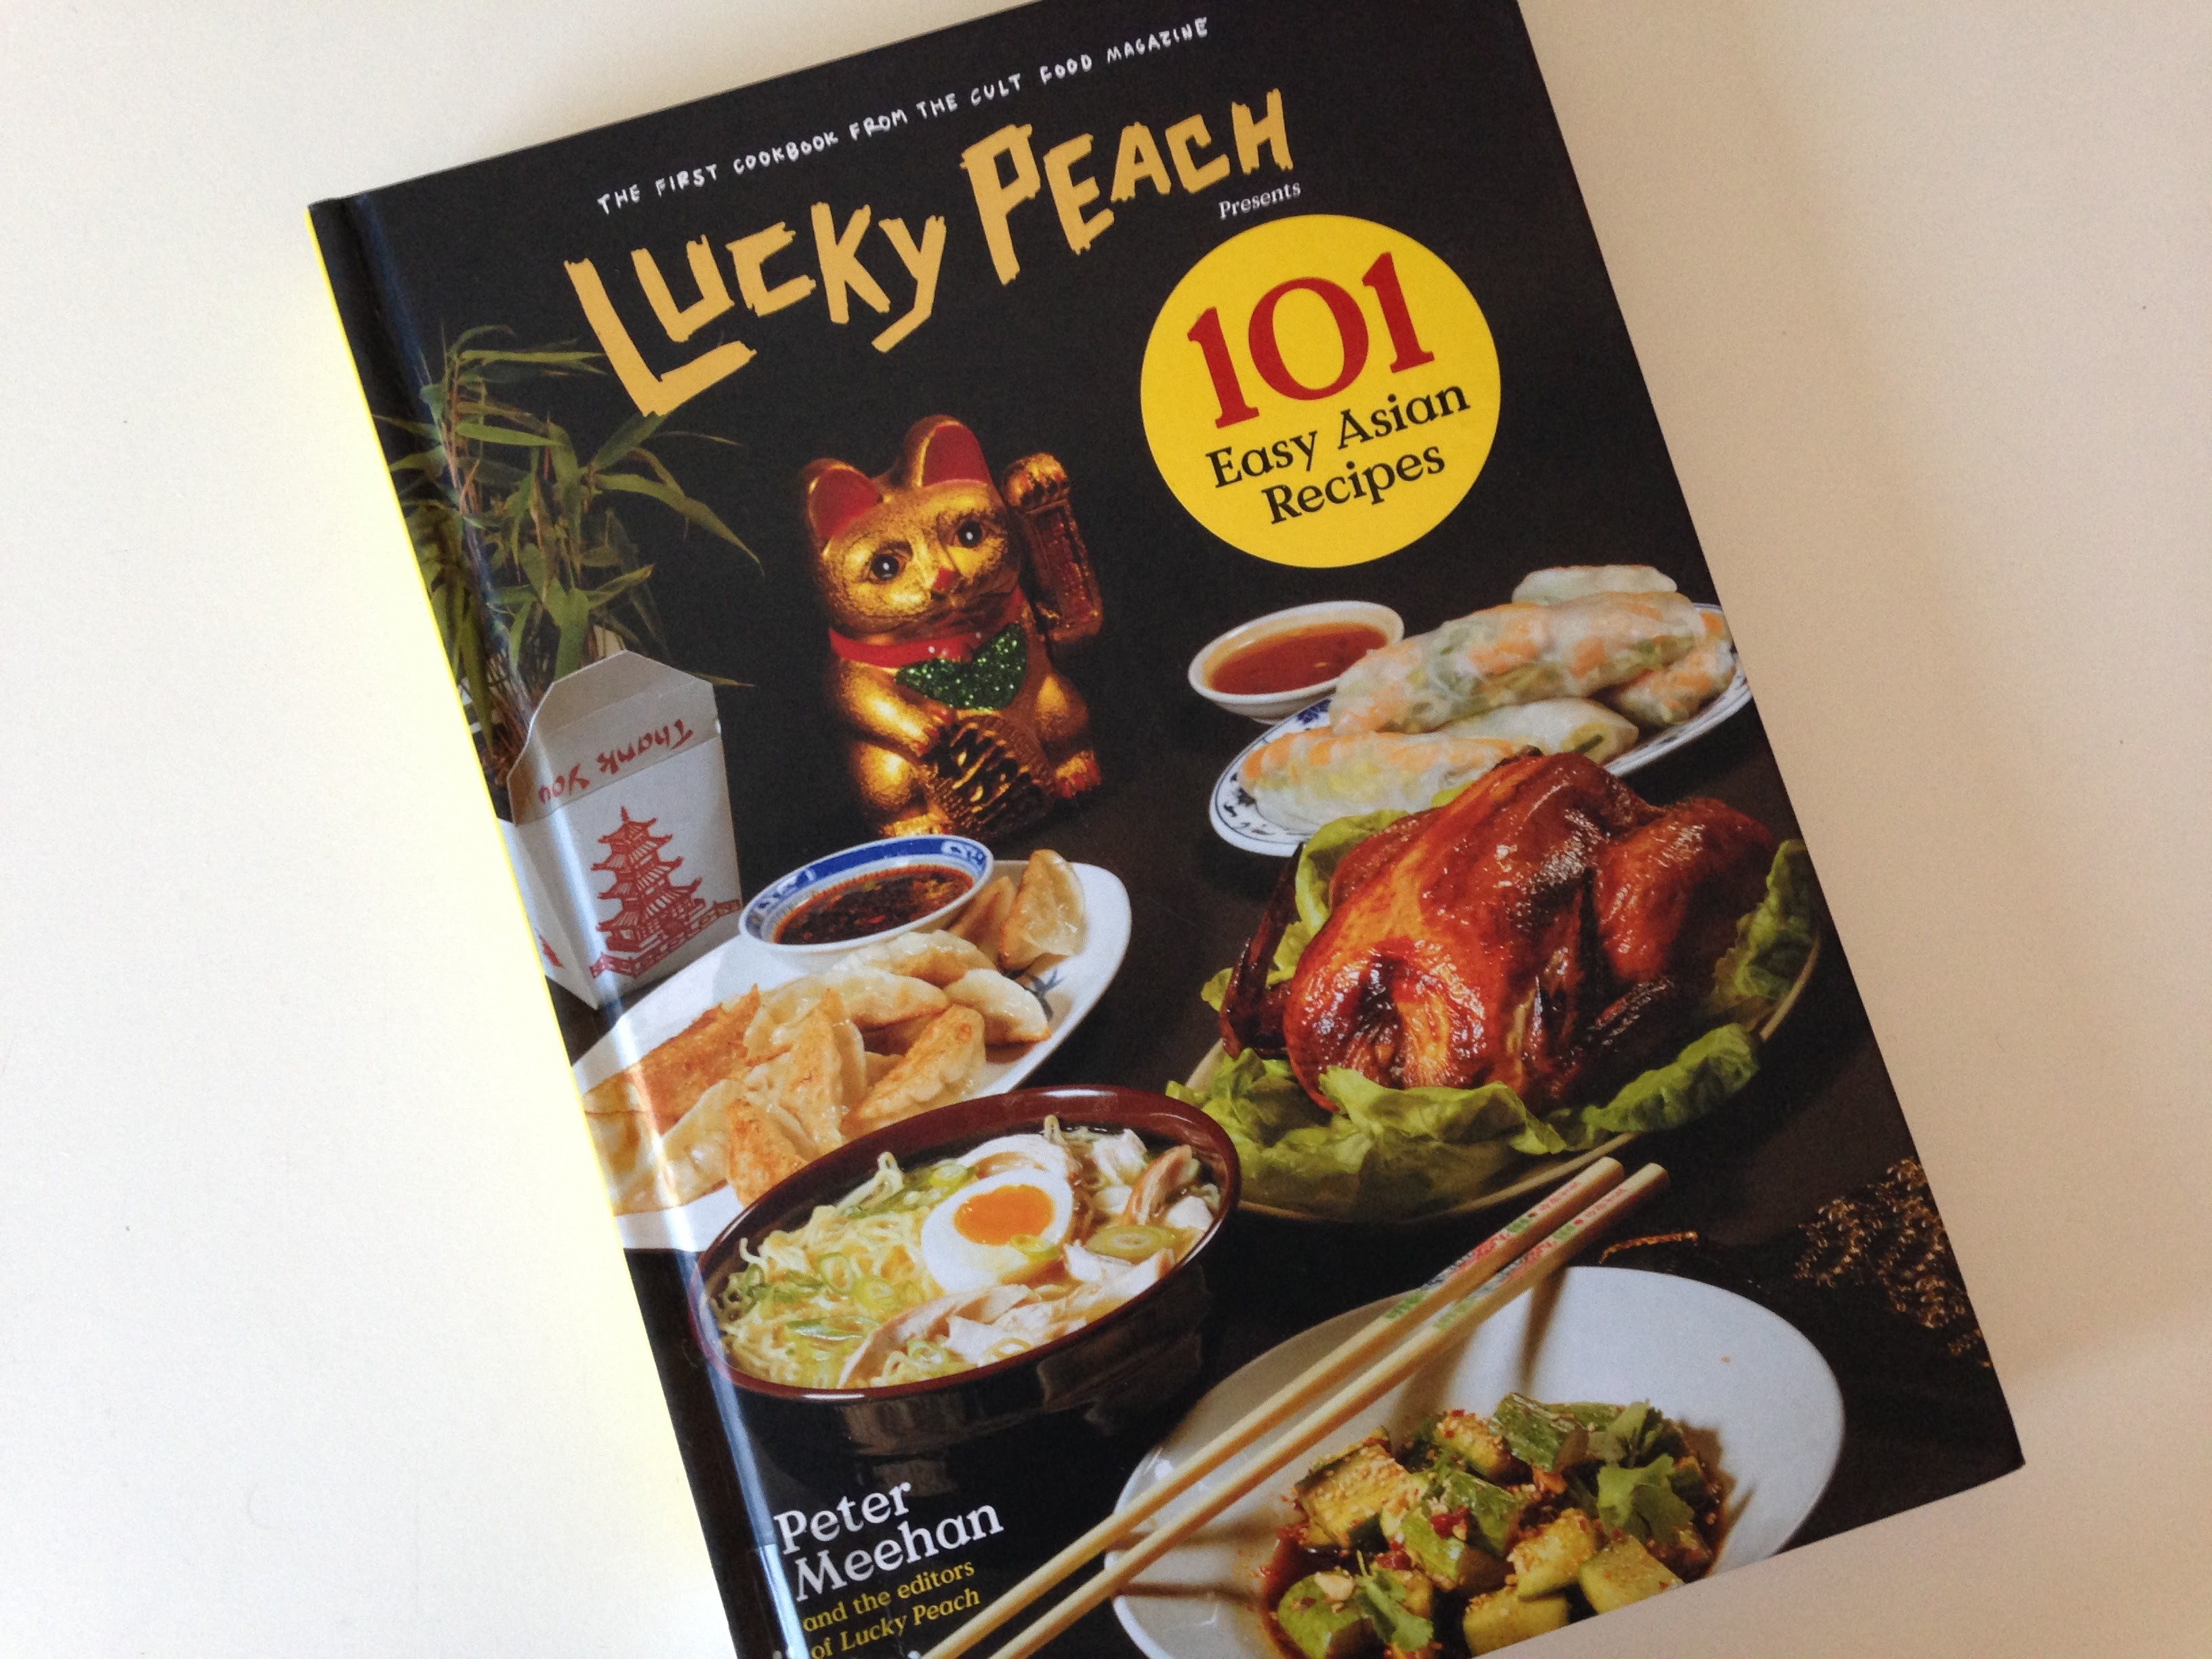 the cookbook Lucky Peach Presents 101 Easy Asian Recipes by Peter Meehan